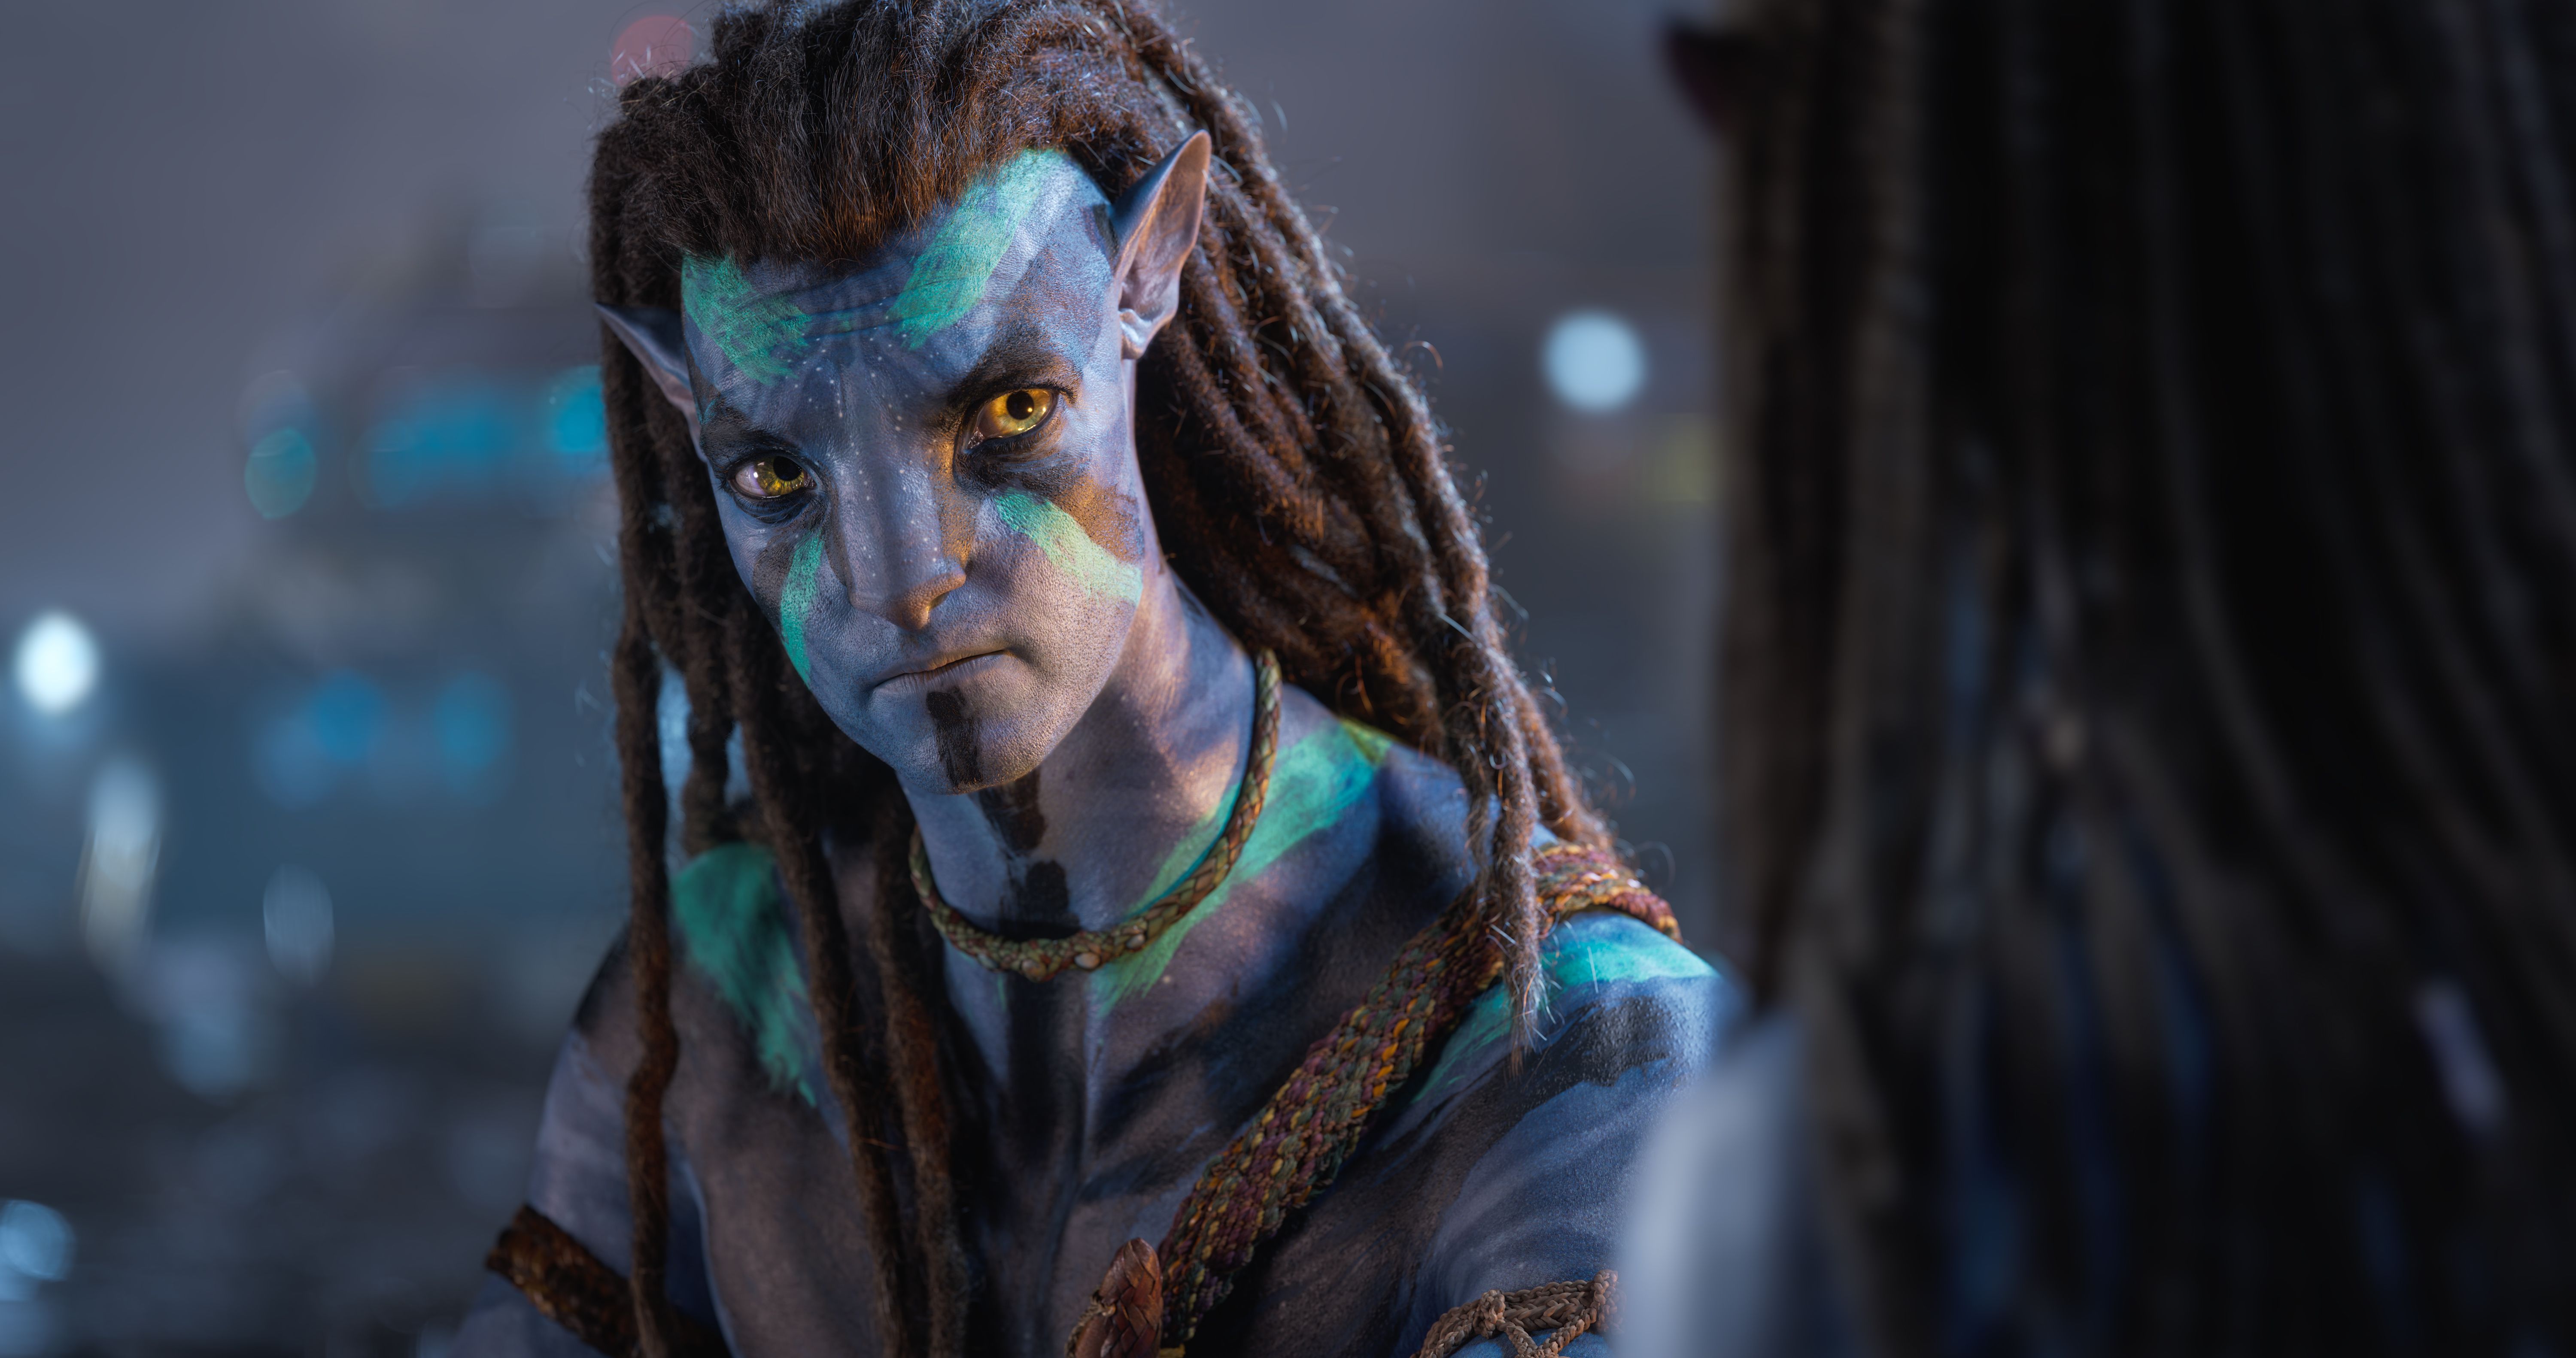 Digital Release Date for Avatar The Way of Water